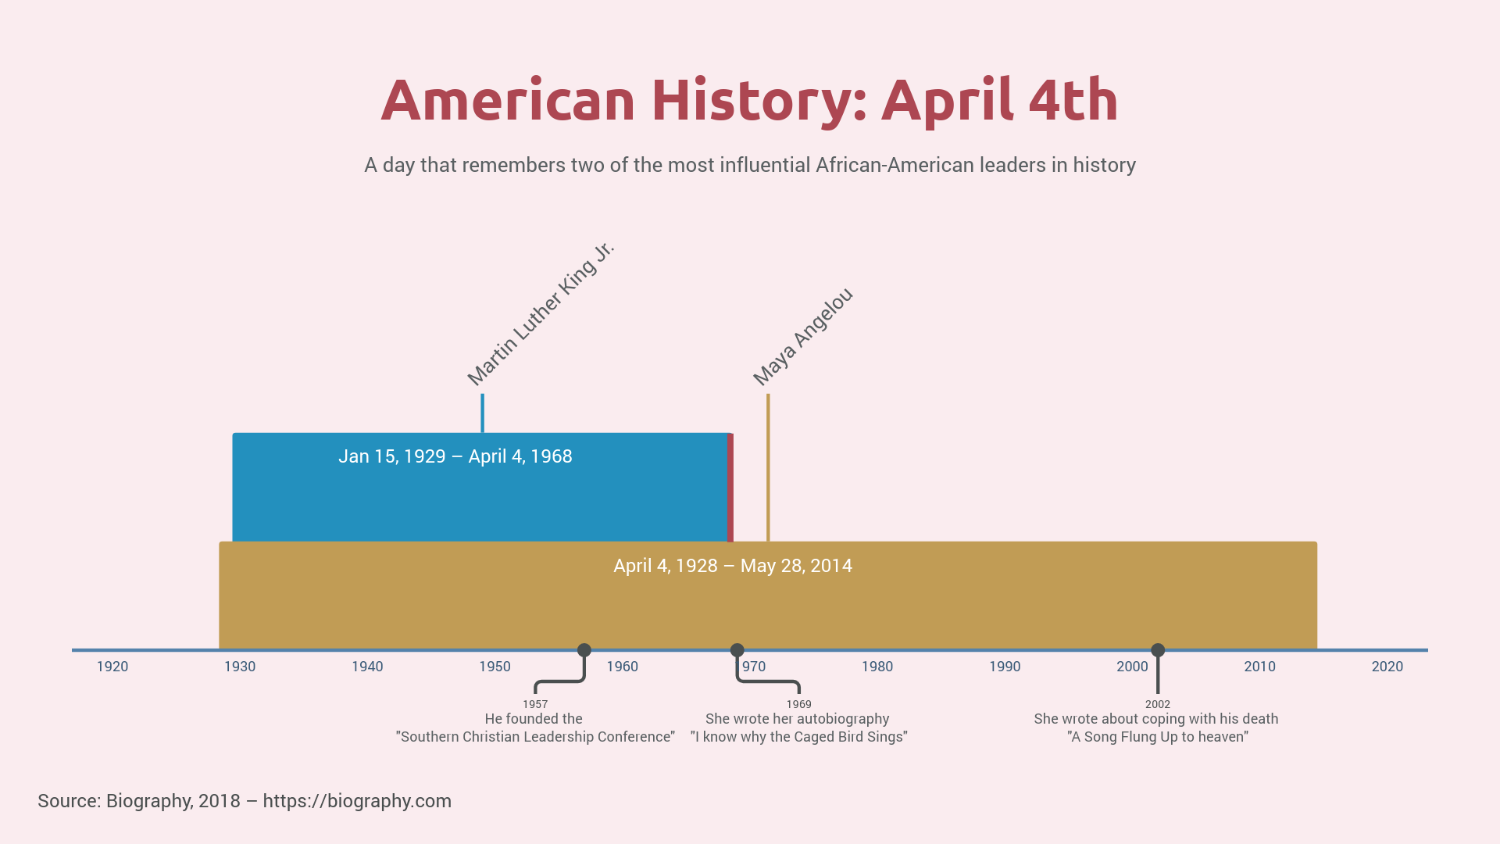 America history timeline - april 4th - black history - lives of Maya Angelou and Martin Luther King jr